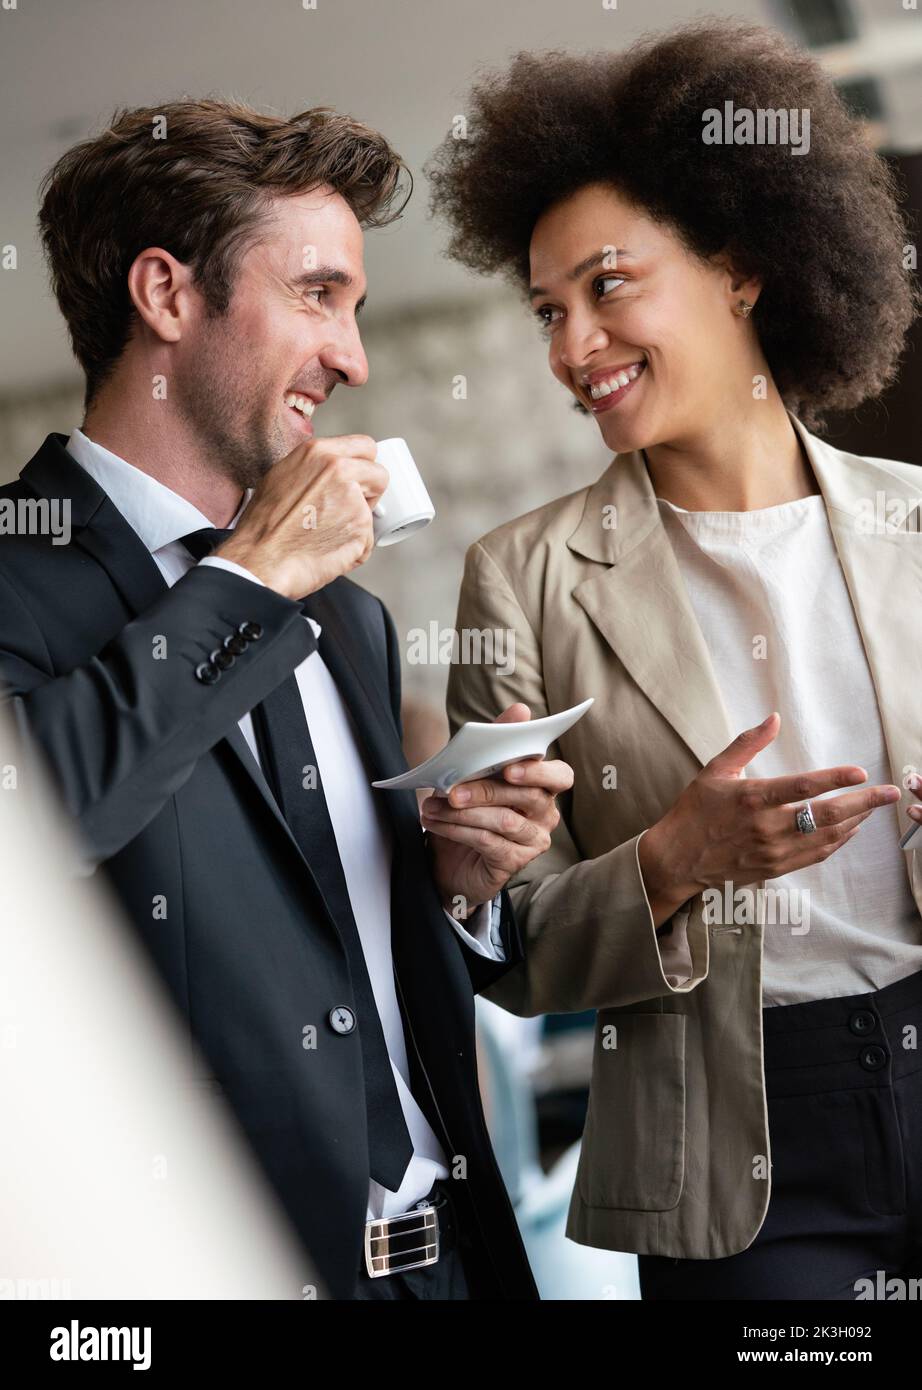 Portrait of businessman drinking coffee, talking to woman colleague Stock Photo